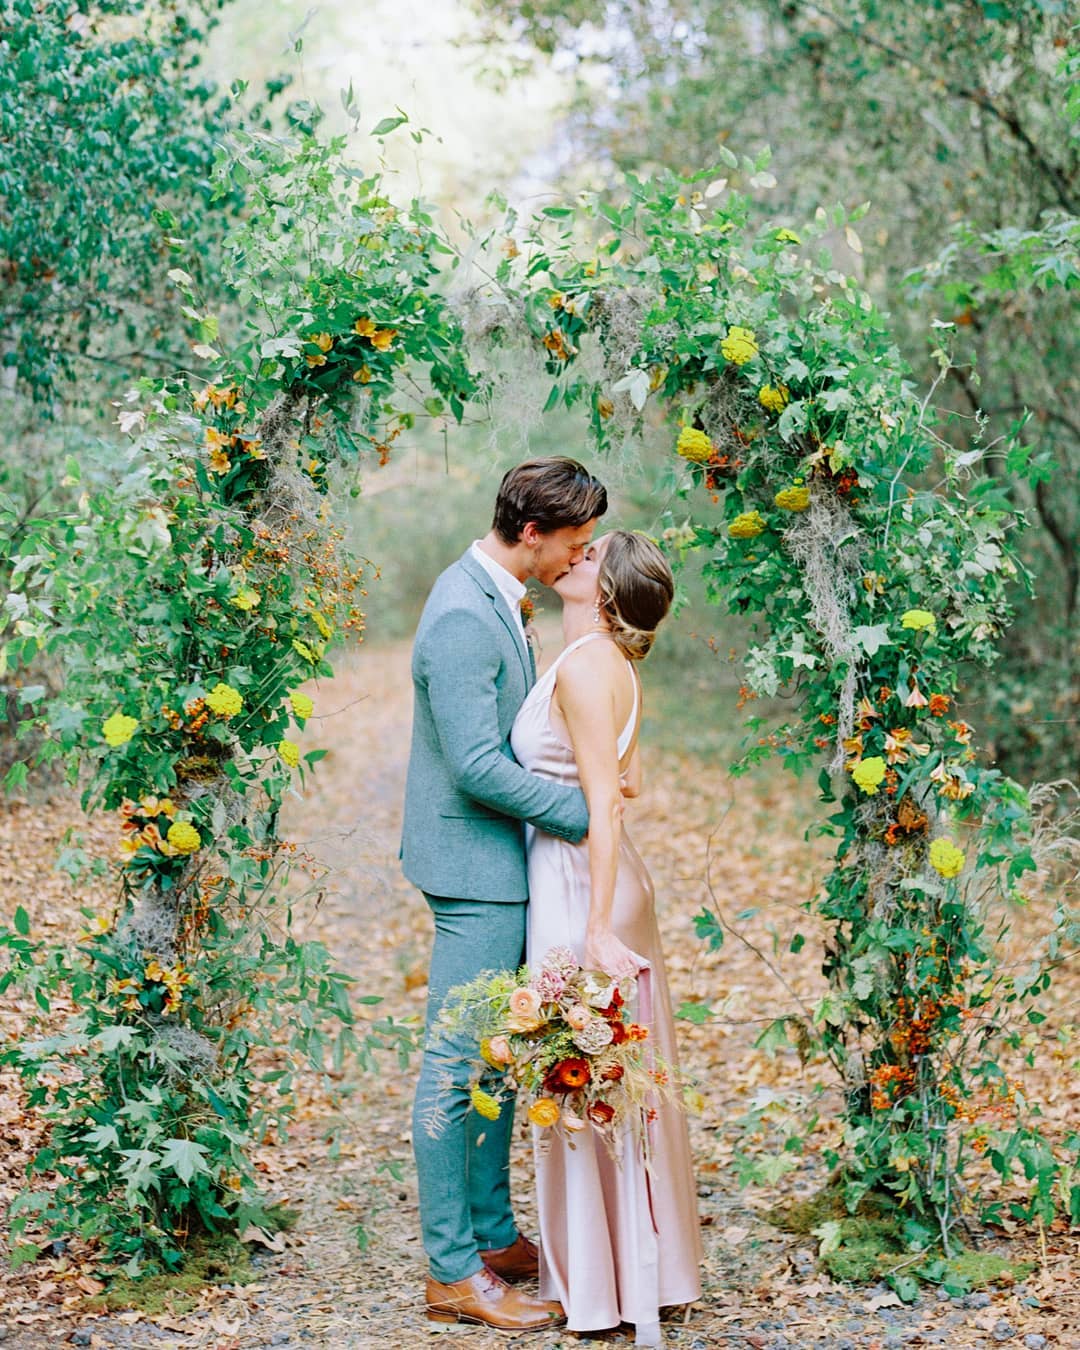 woodsy wedding ceremony witha  greenery and seasonal flower arch and couple kiss